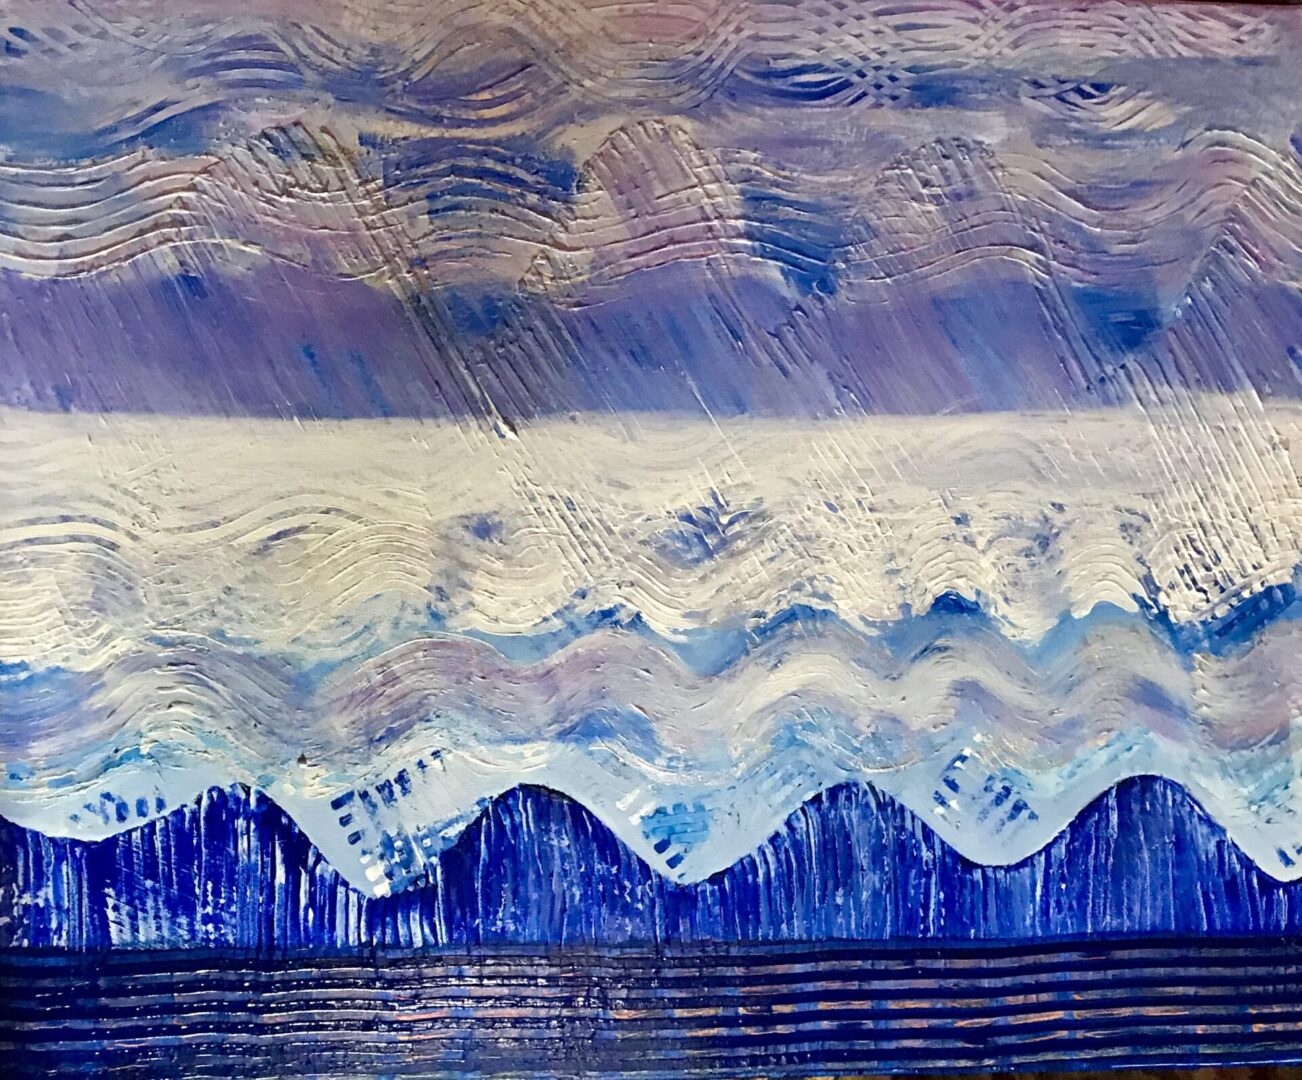 A painting of waves on the ocean with a sky background